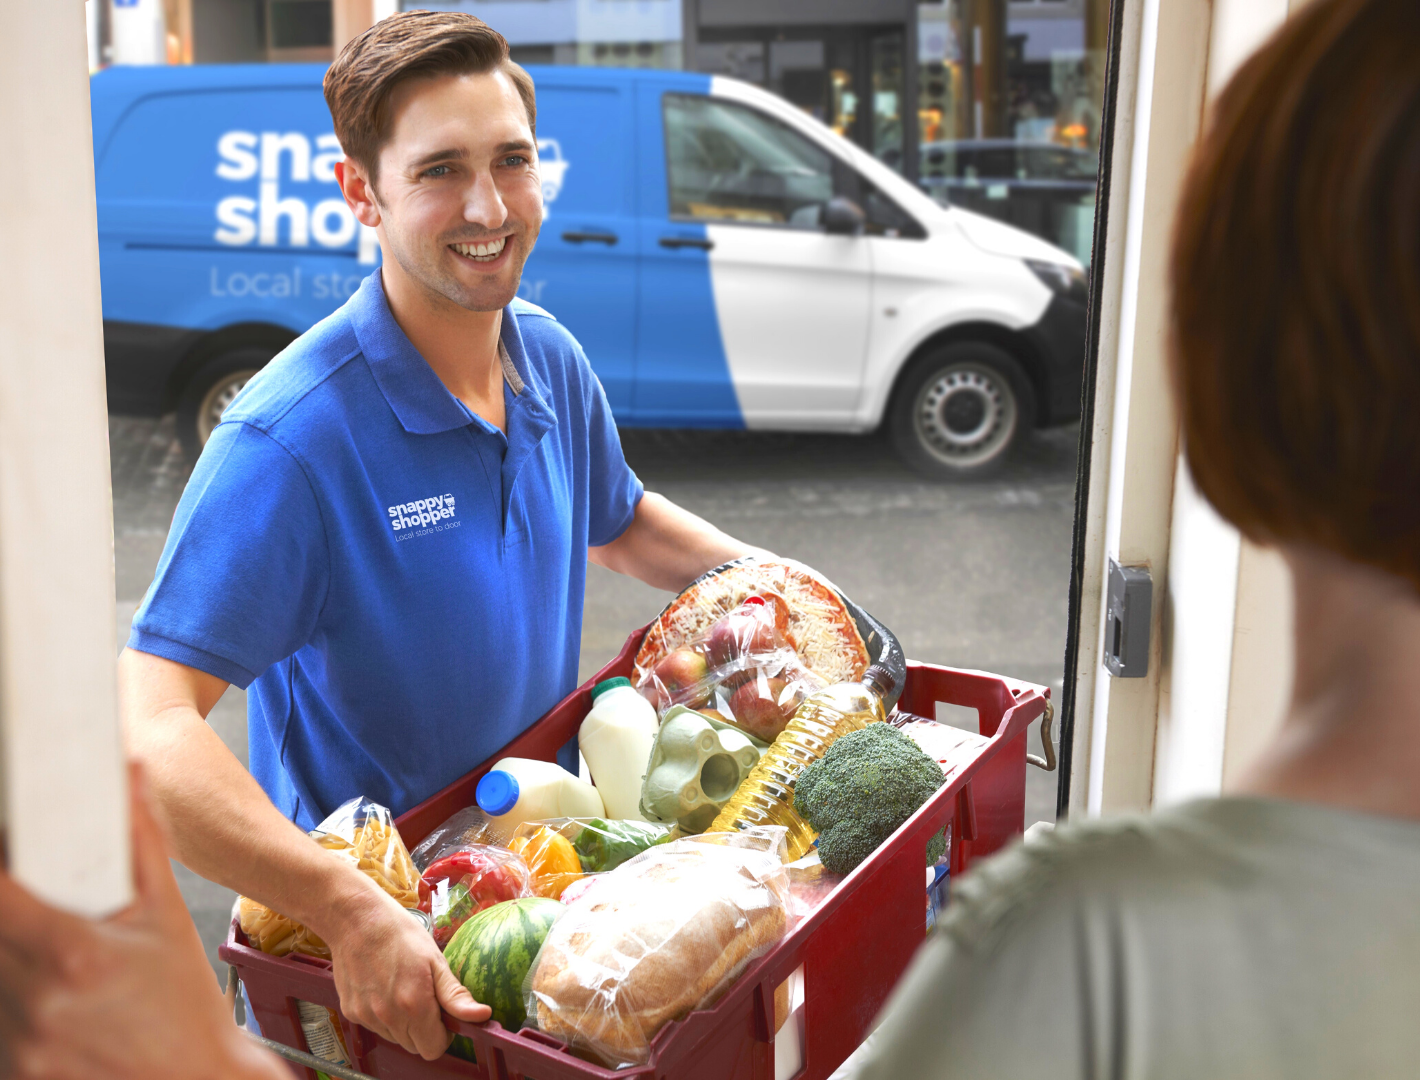 Engage your local community with Snappy Shopper